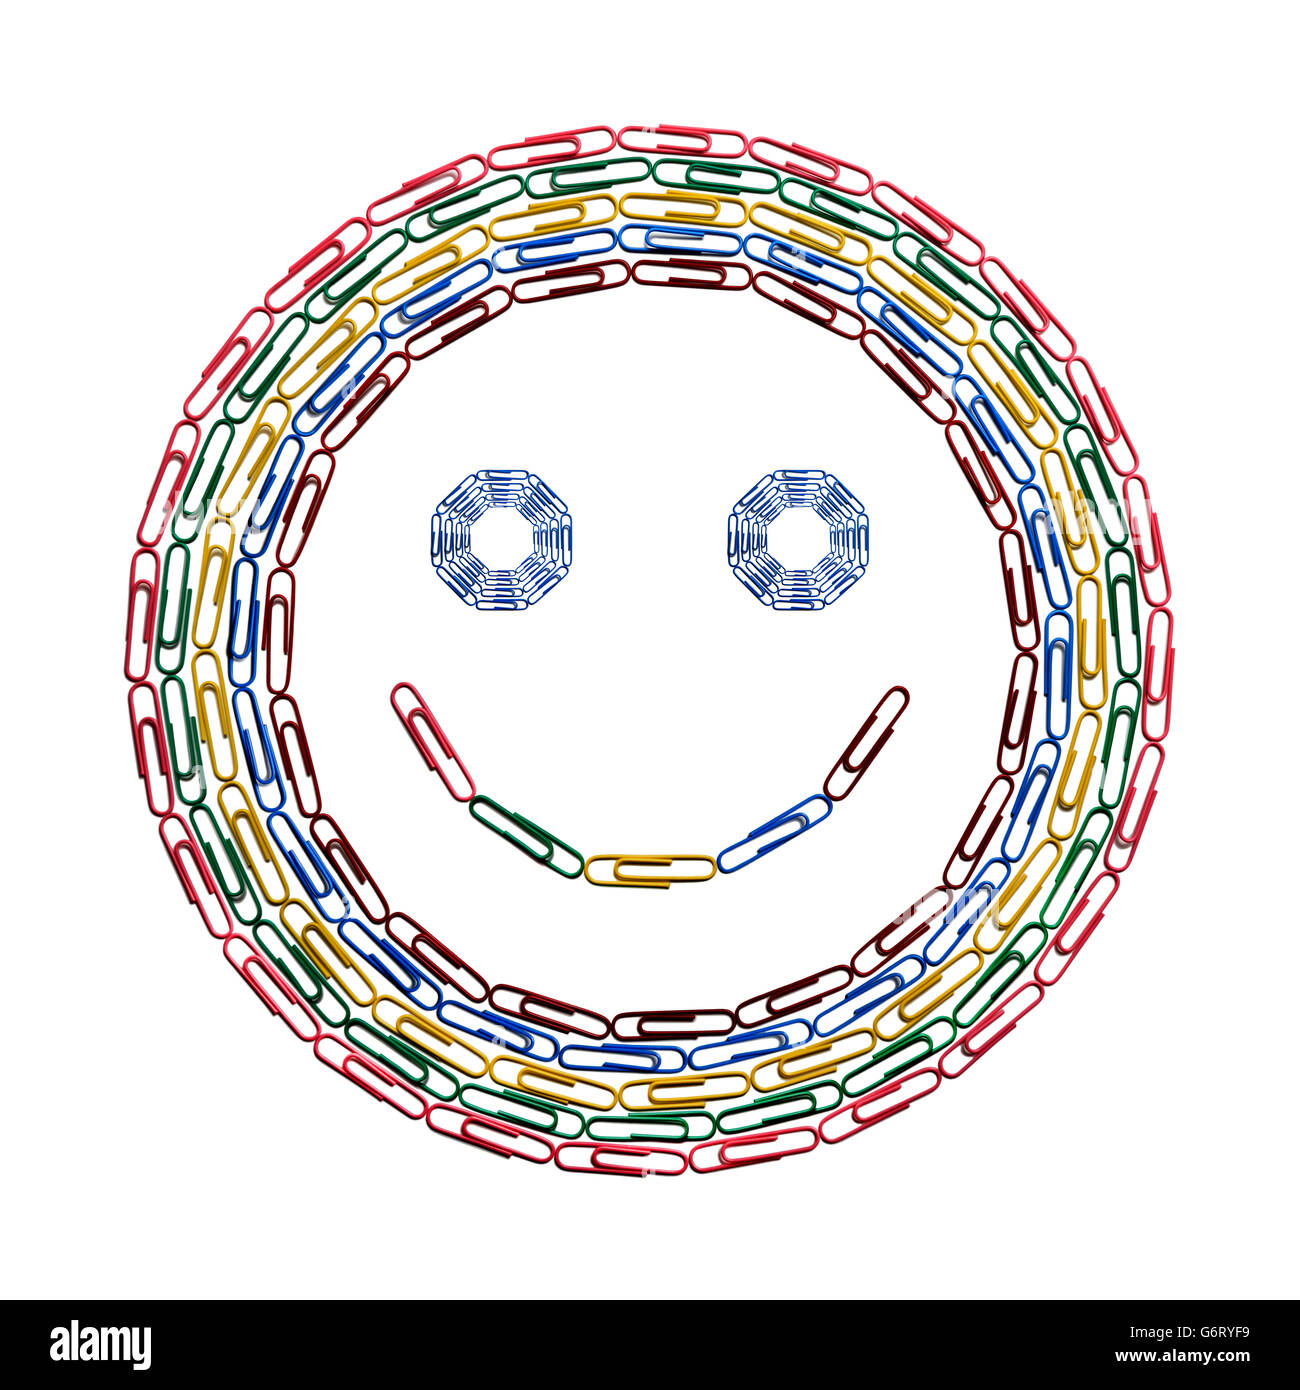 Smiley face made from paper clips Stock Photo